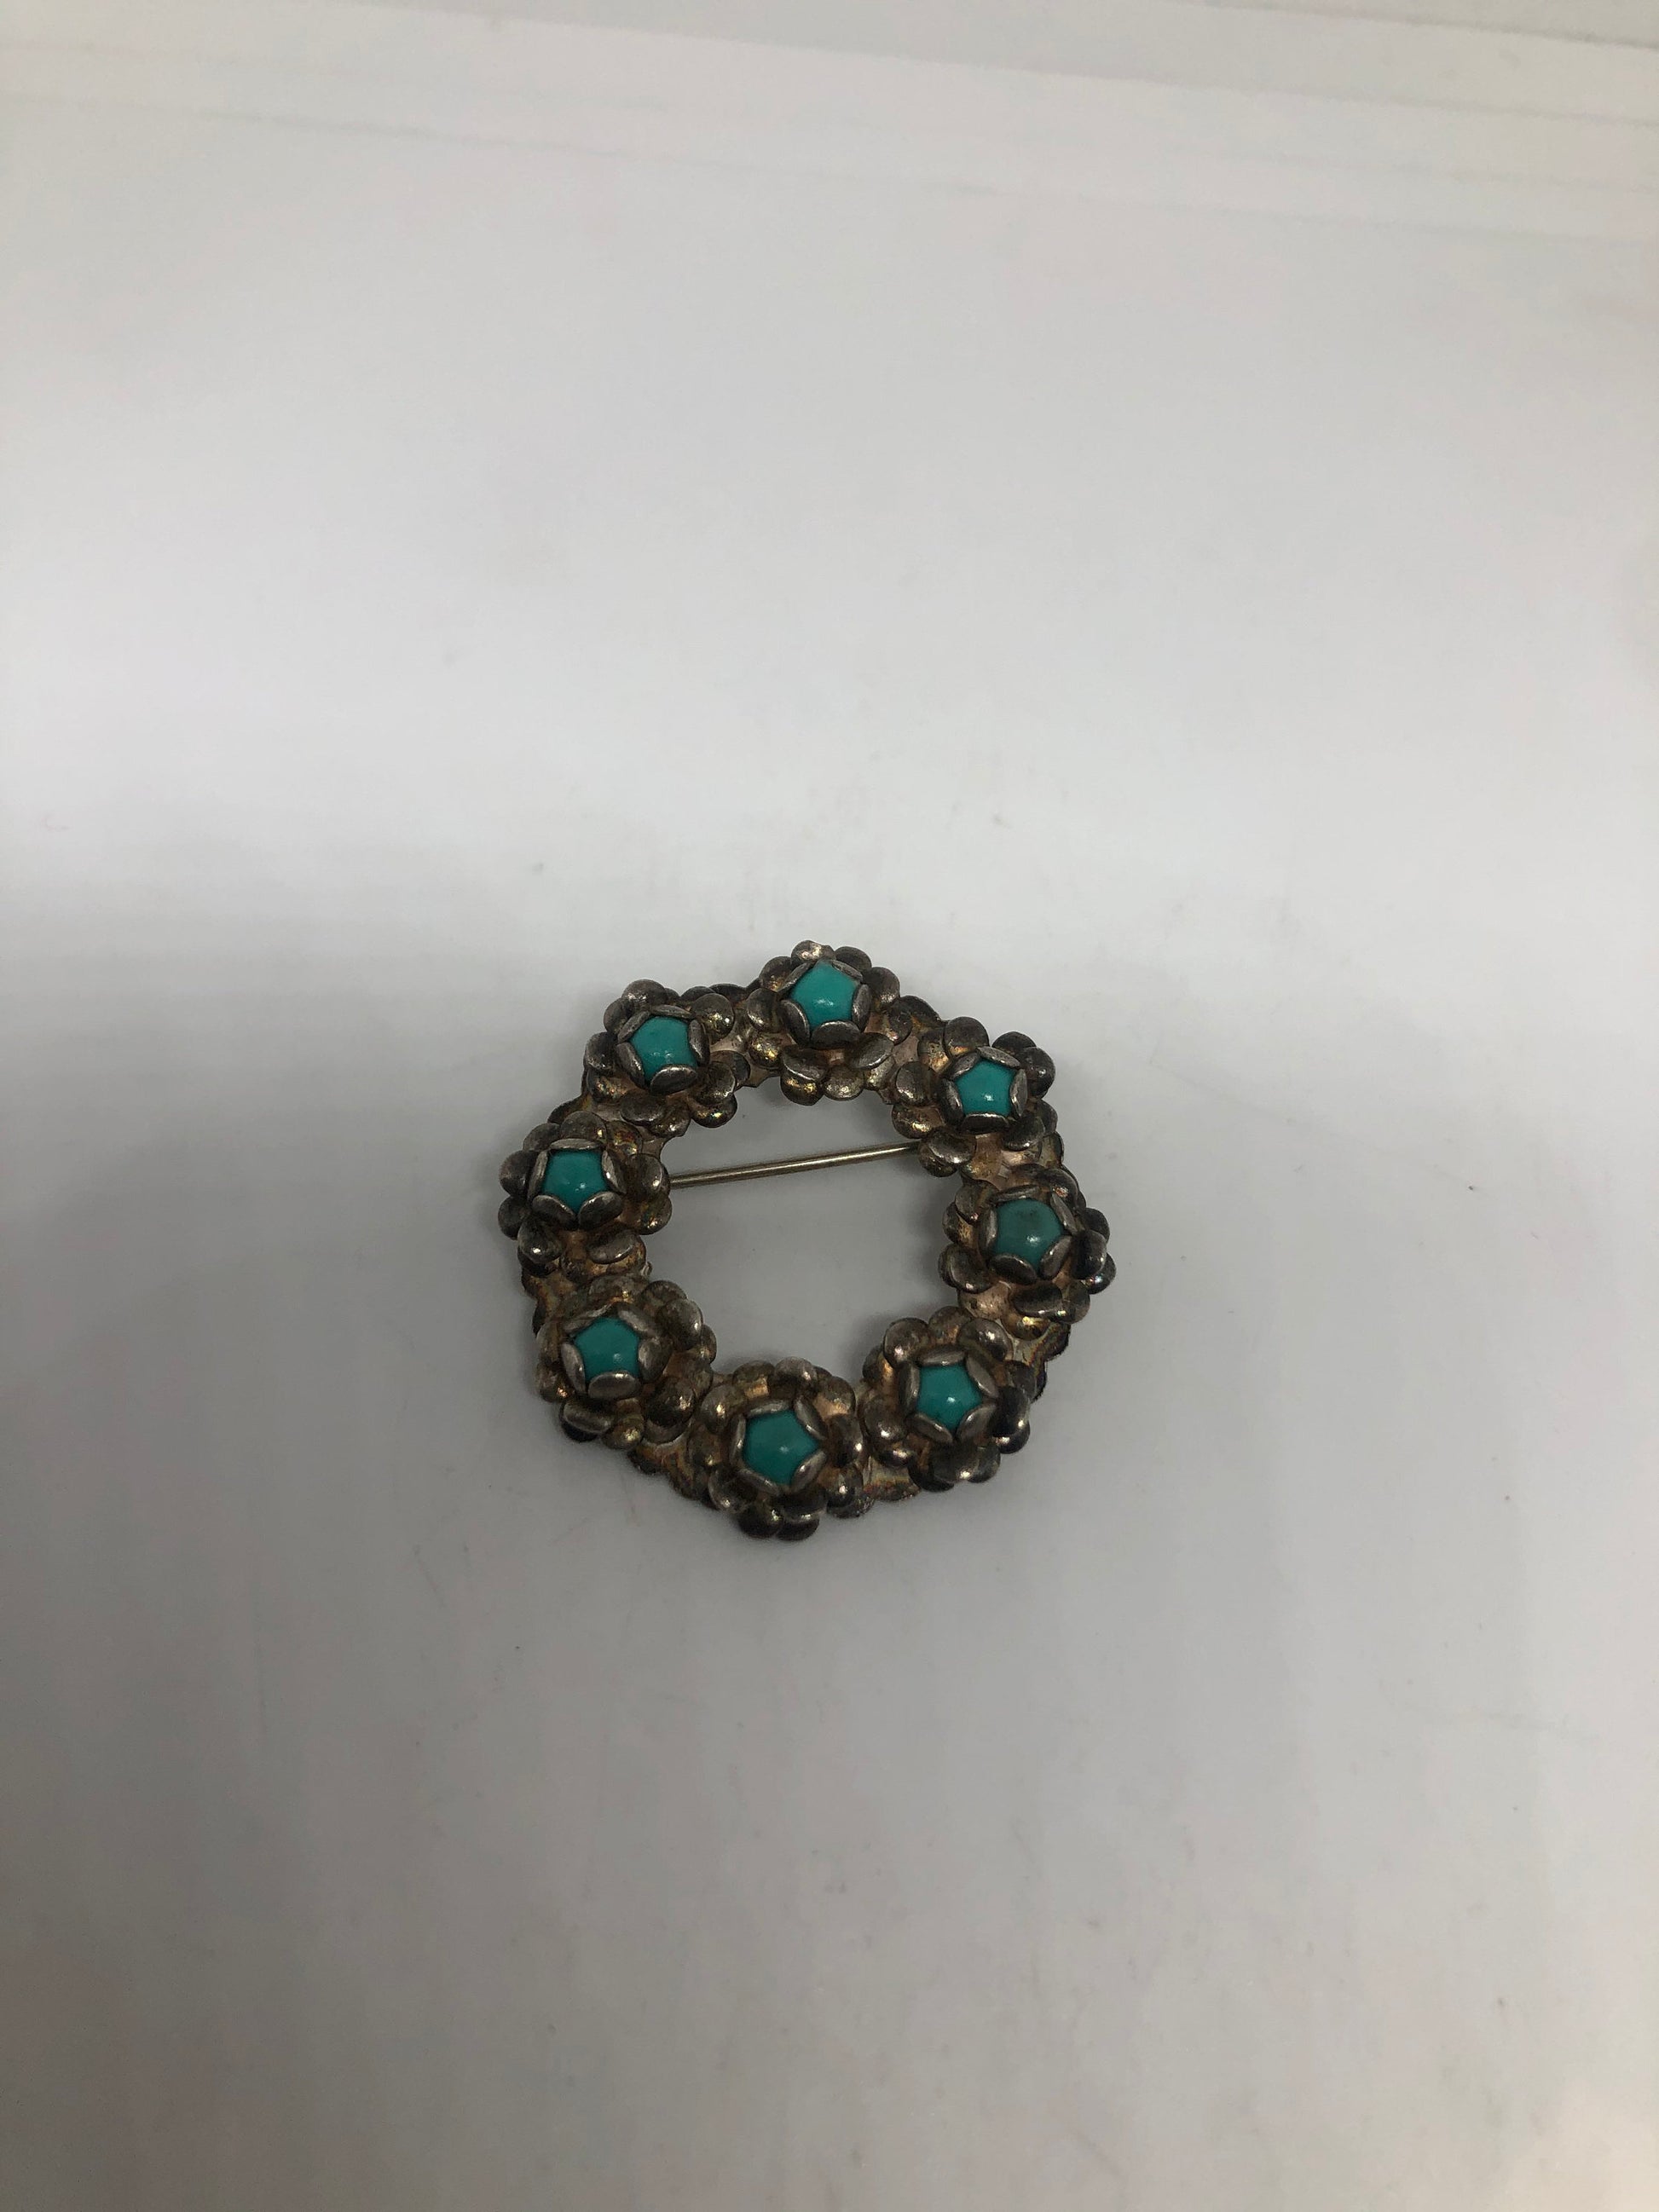 Vintage Turquoise Flower 925 Sterling Silver Brooch Pin